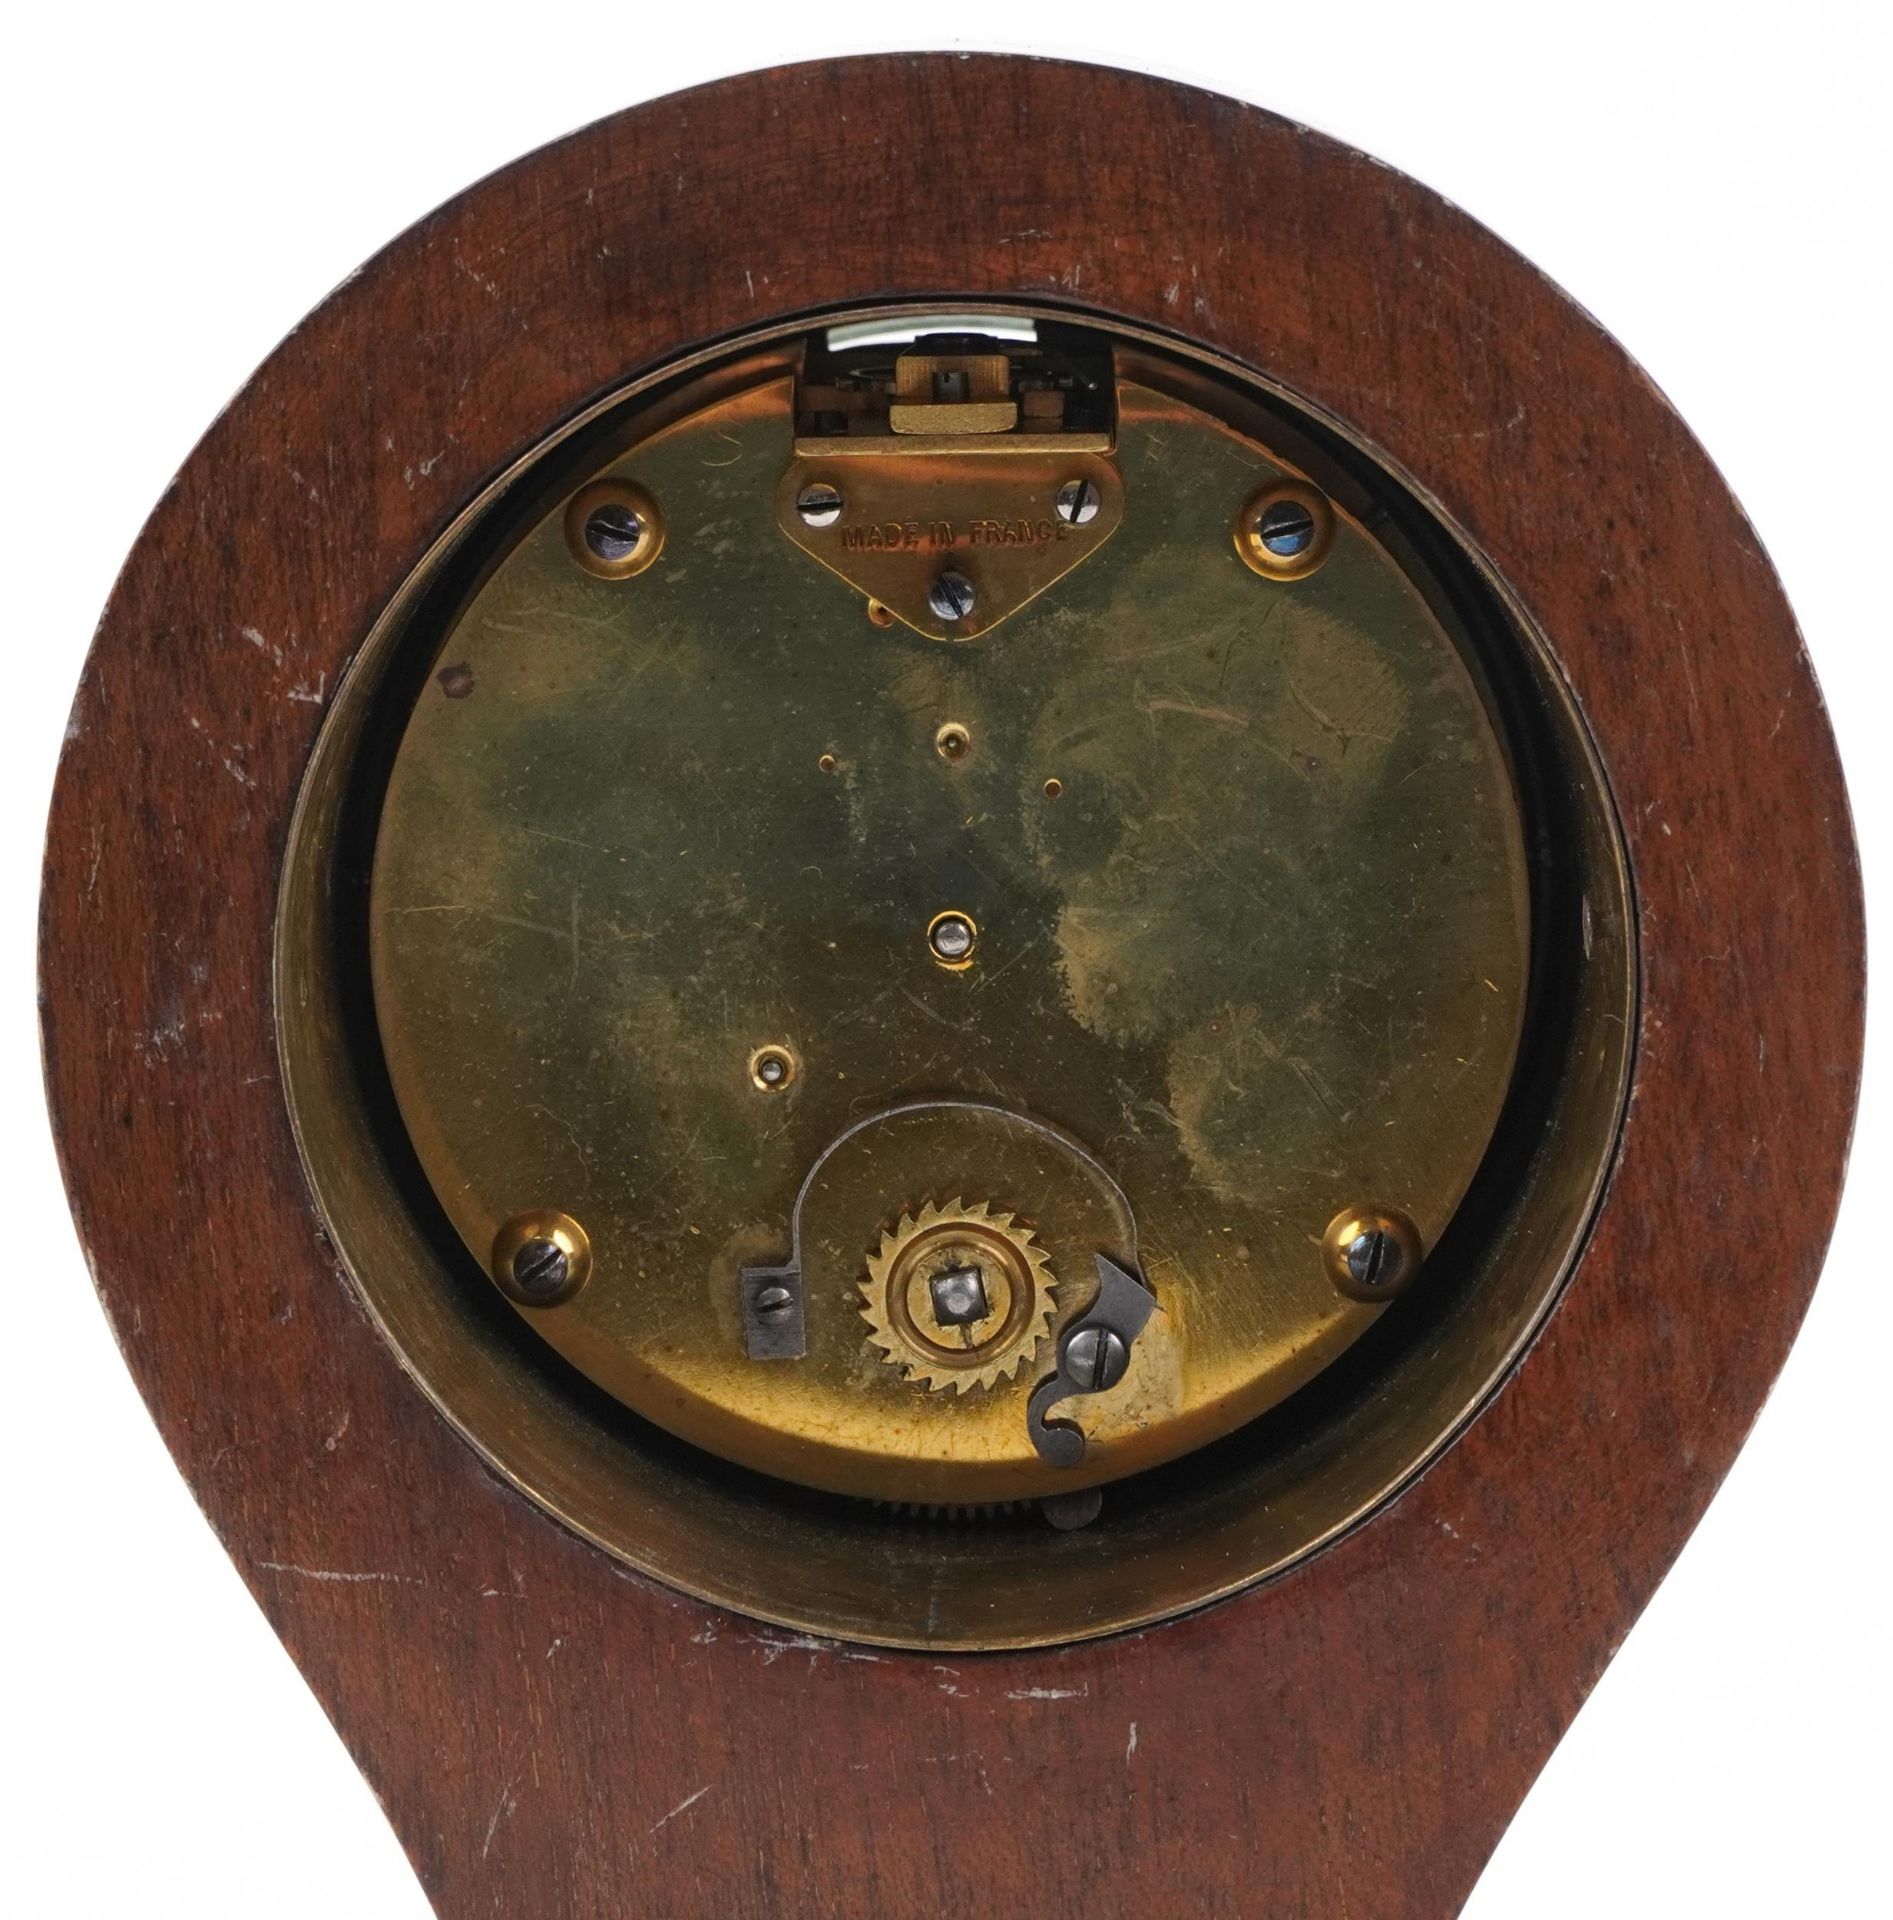 Edwardian inlaid mahogany balloon shaped mantle clock with enamelled dial having Roman numerals, - Image 4 of 4